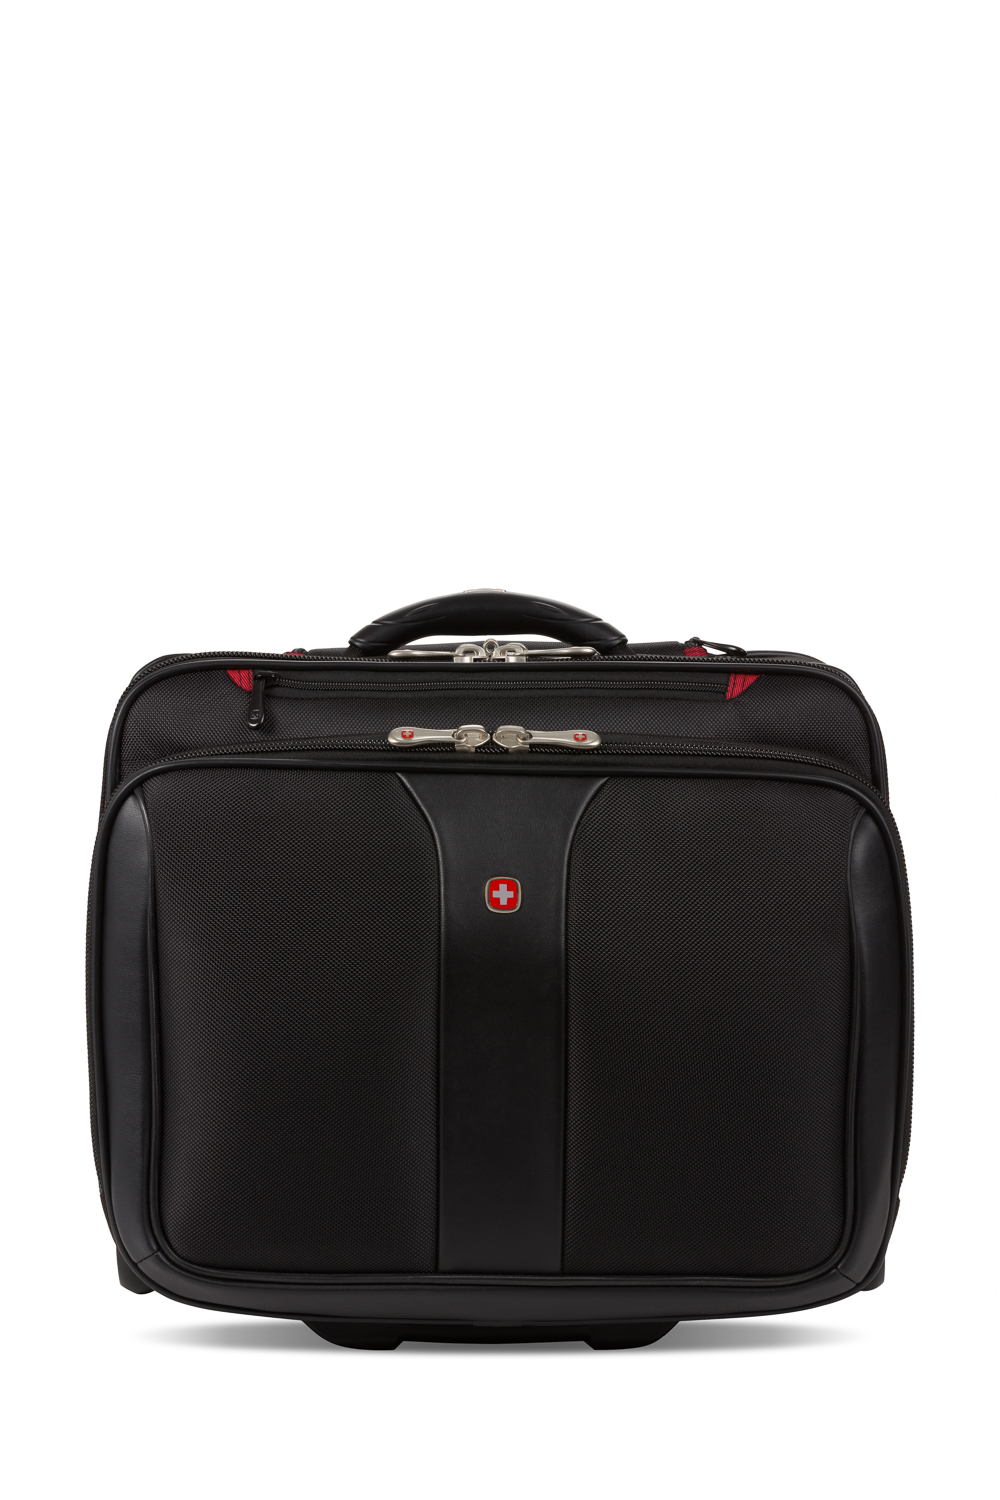 Wenger Patriot Wheeled Business Case with Removable Laptop Case